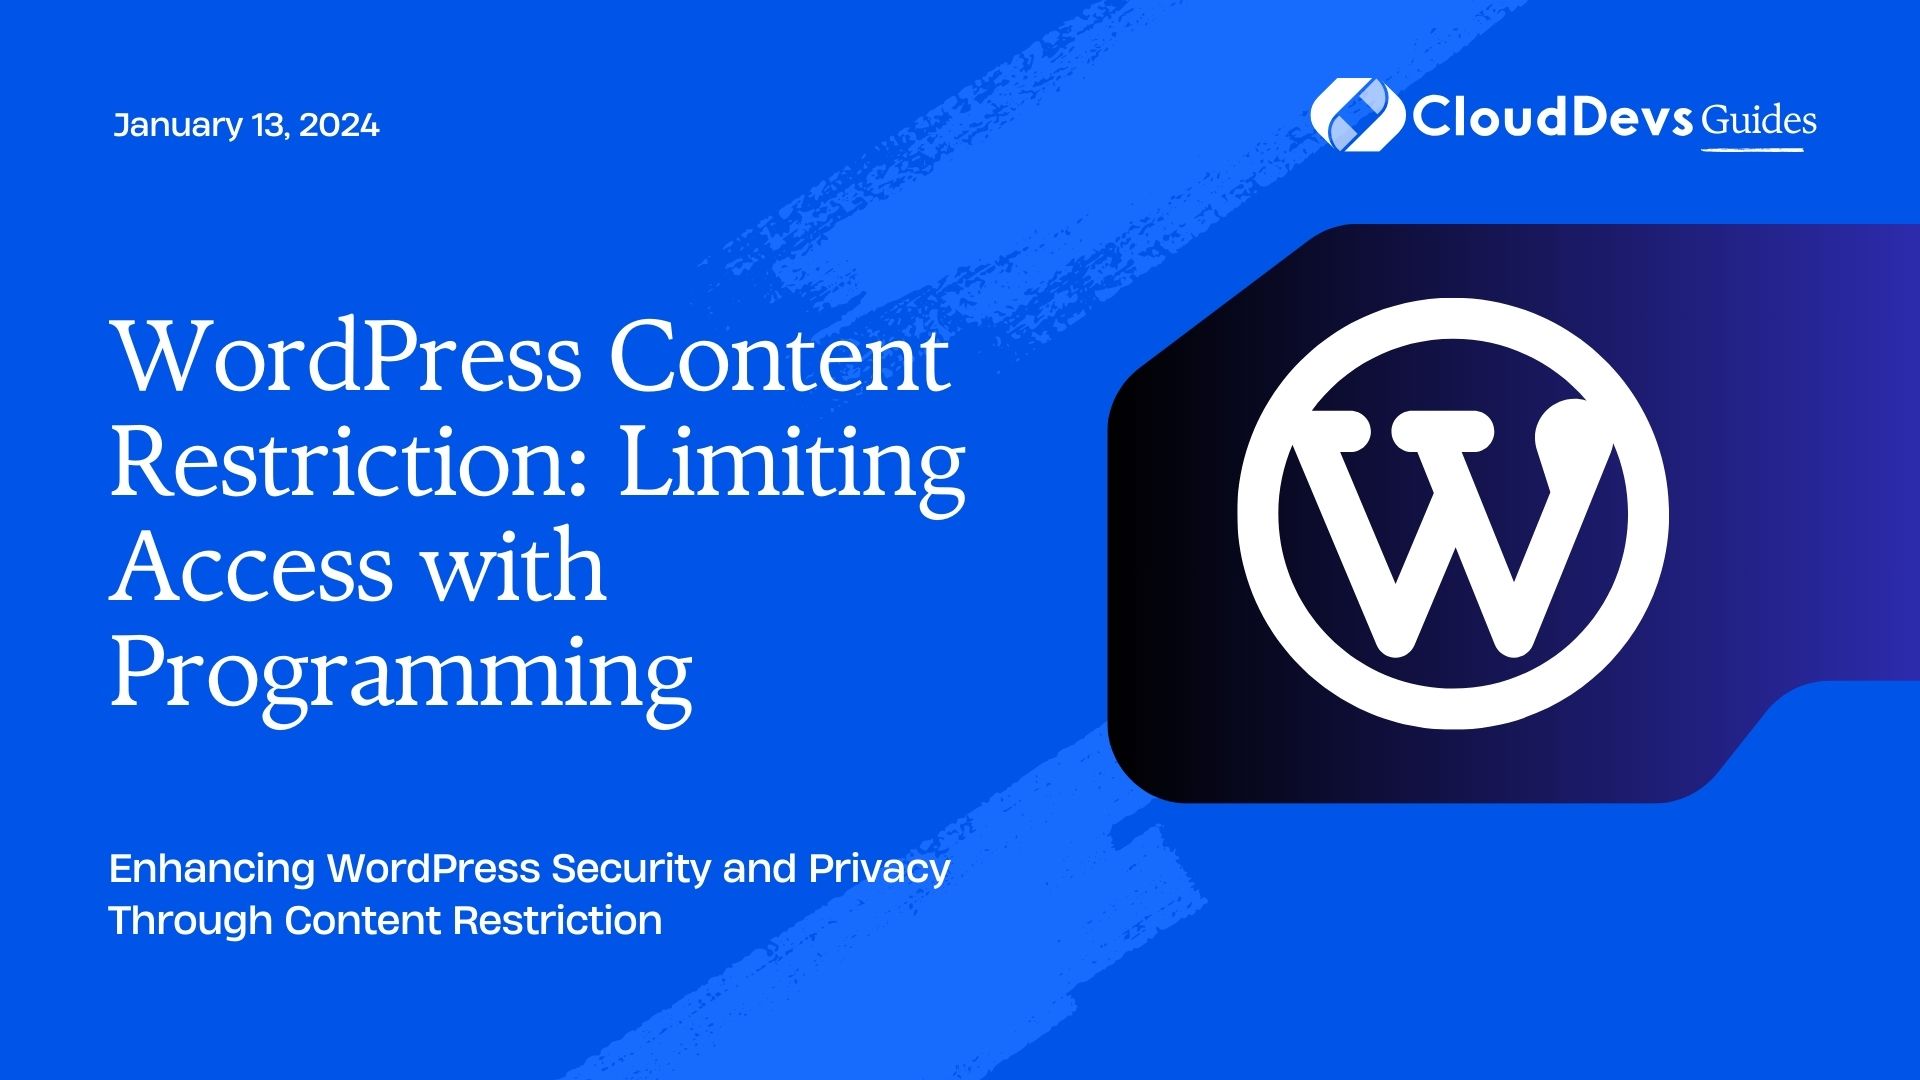 WordPress Content Restriction: Limiting Access with Programming